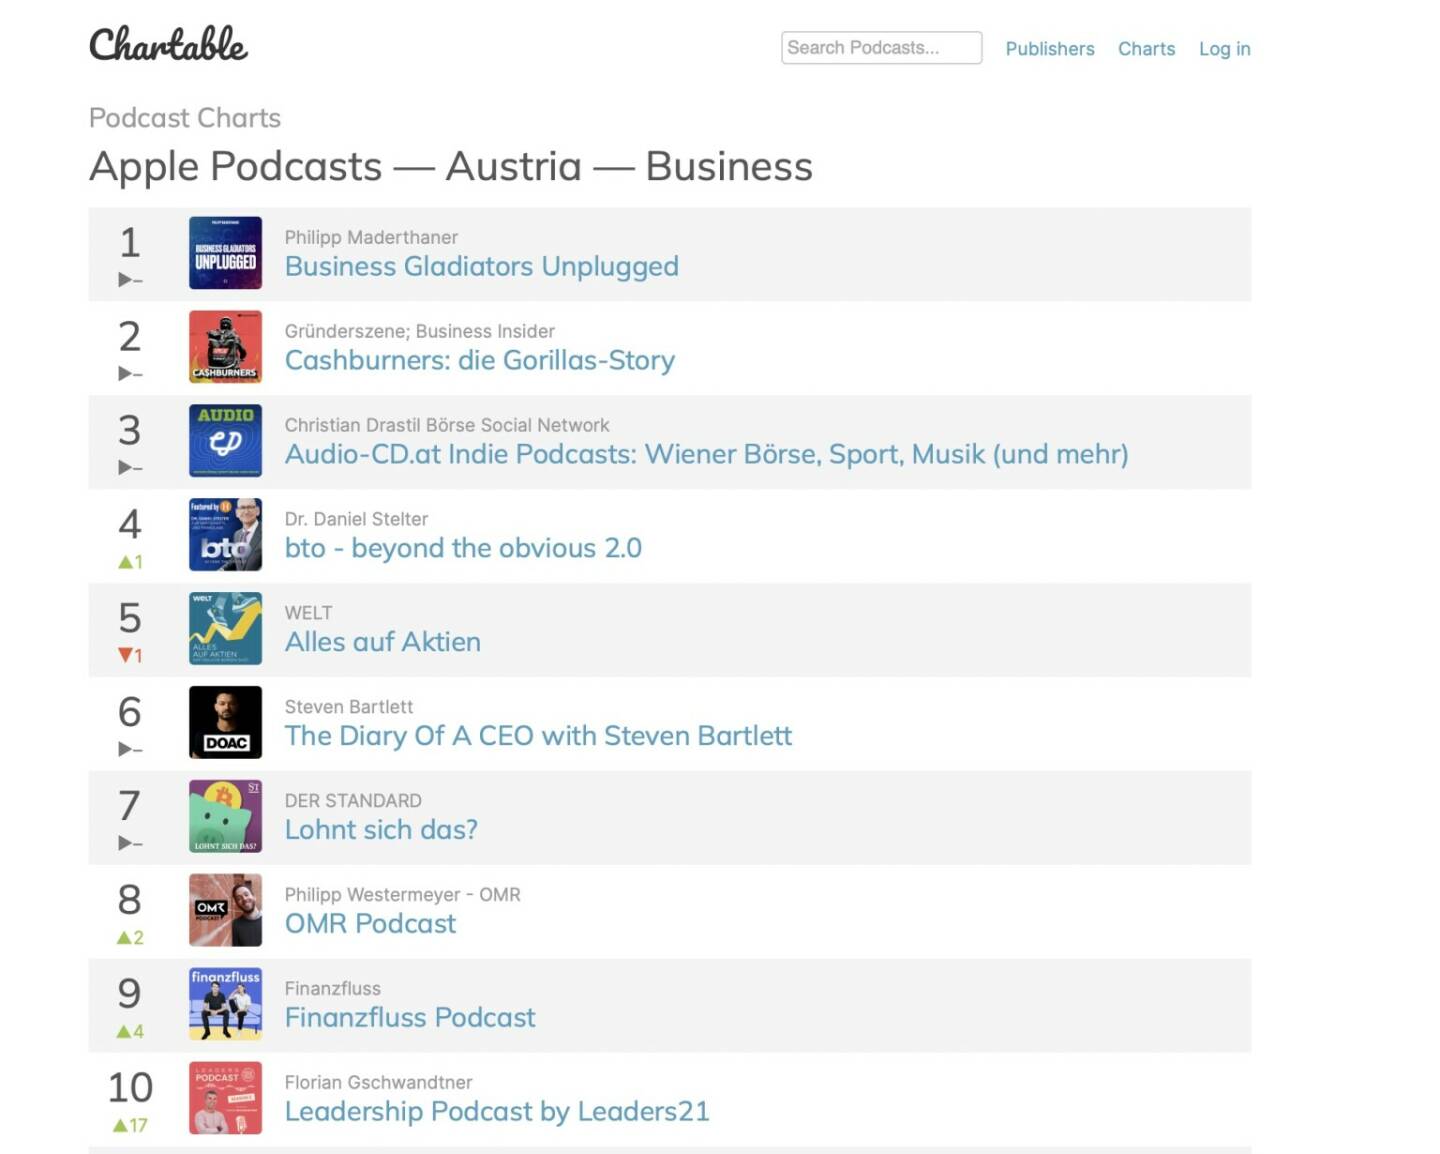 Ende Q1 2023 : Audio-CD.at Nr. 3 in den Apple Podcast Charts Austria Business